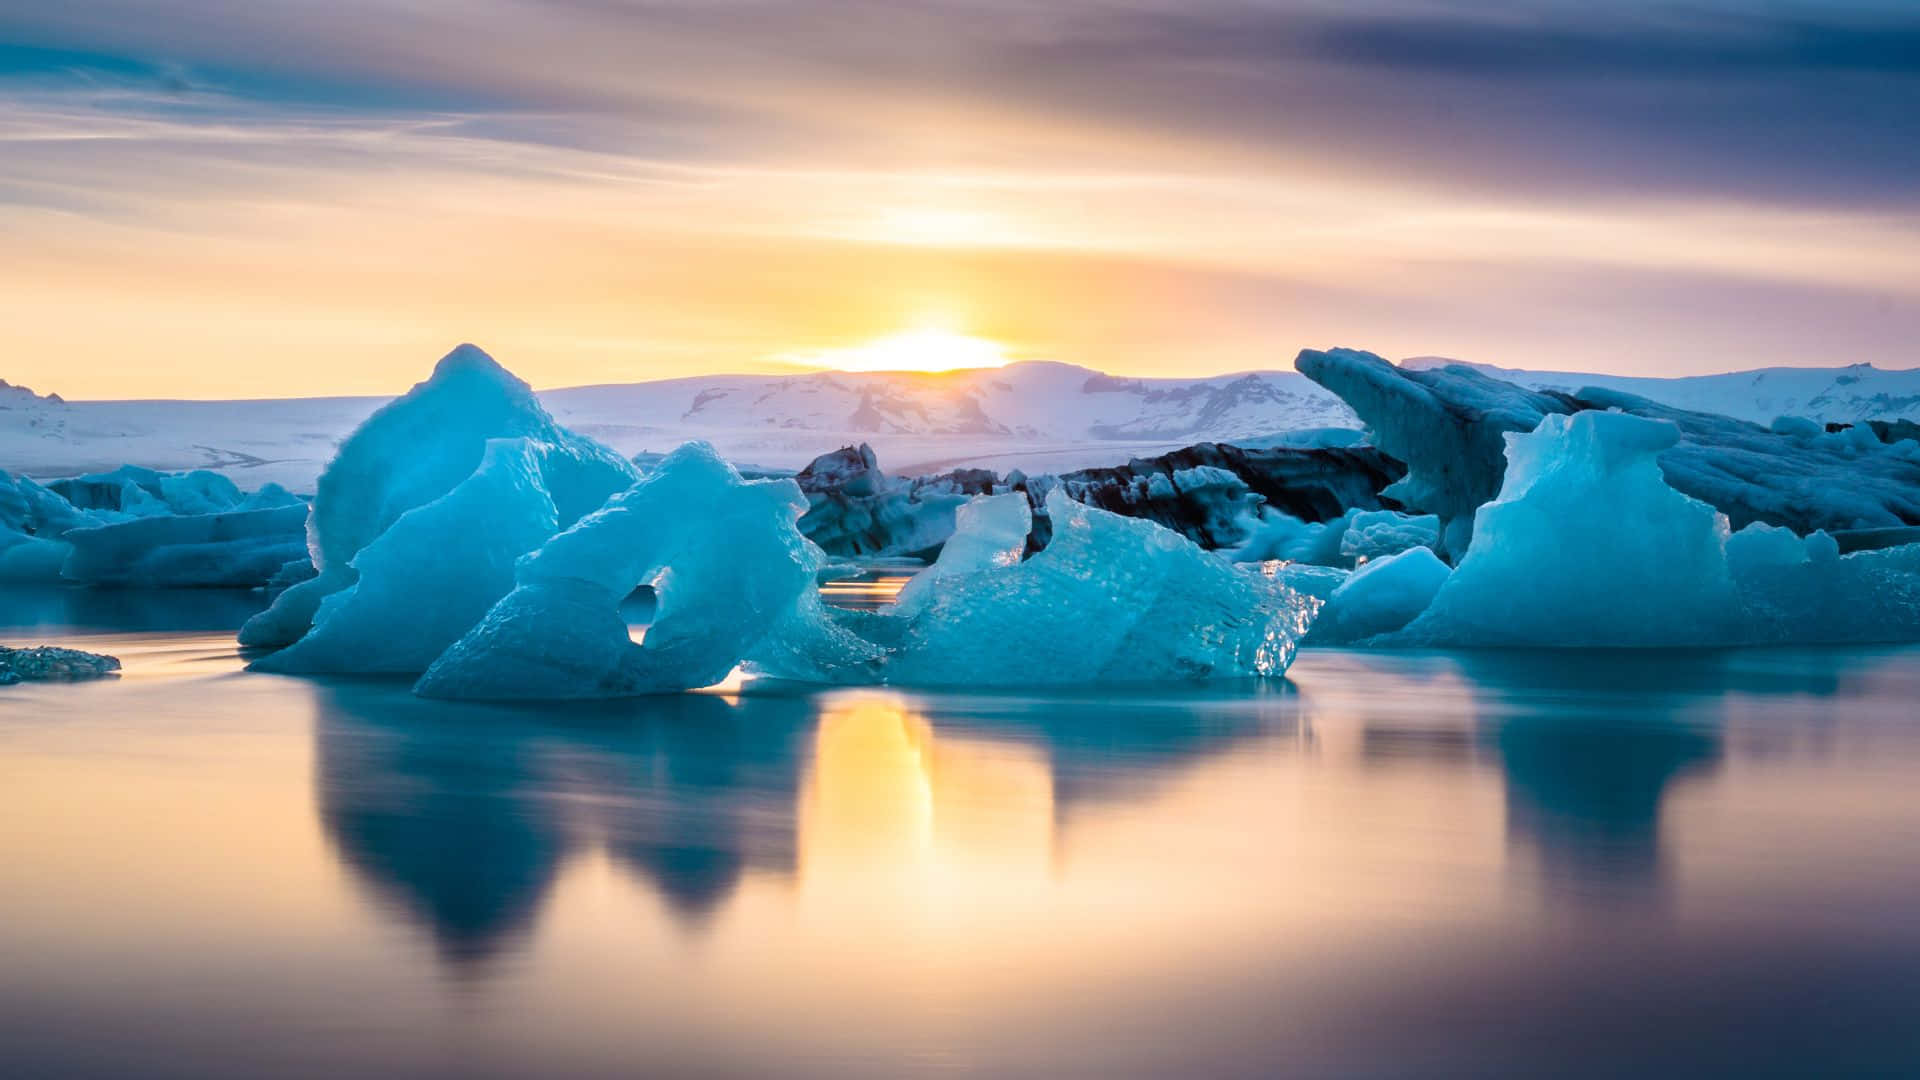 Icebergs In The Water At Sunset